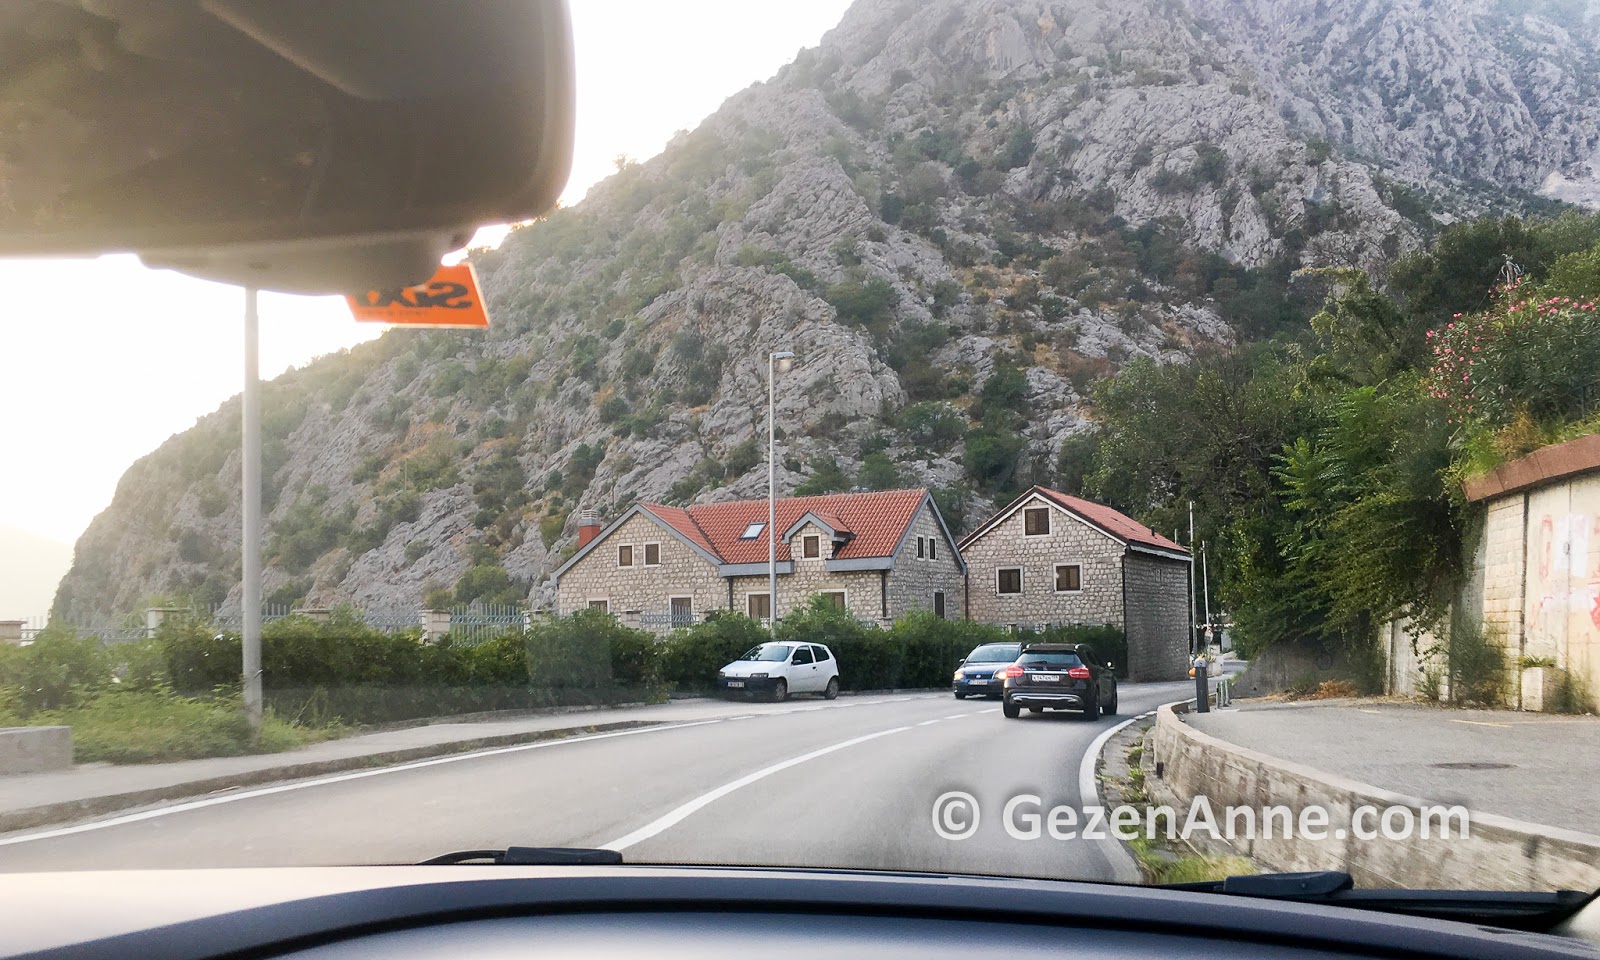 The roads in Montenegro on our Balkans road trip